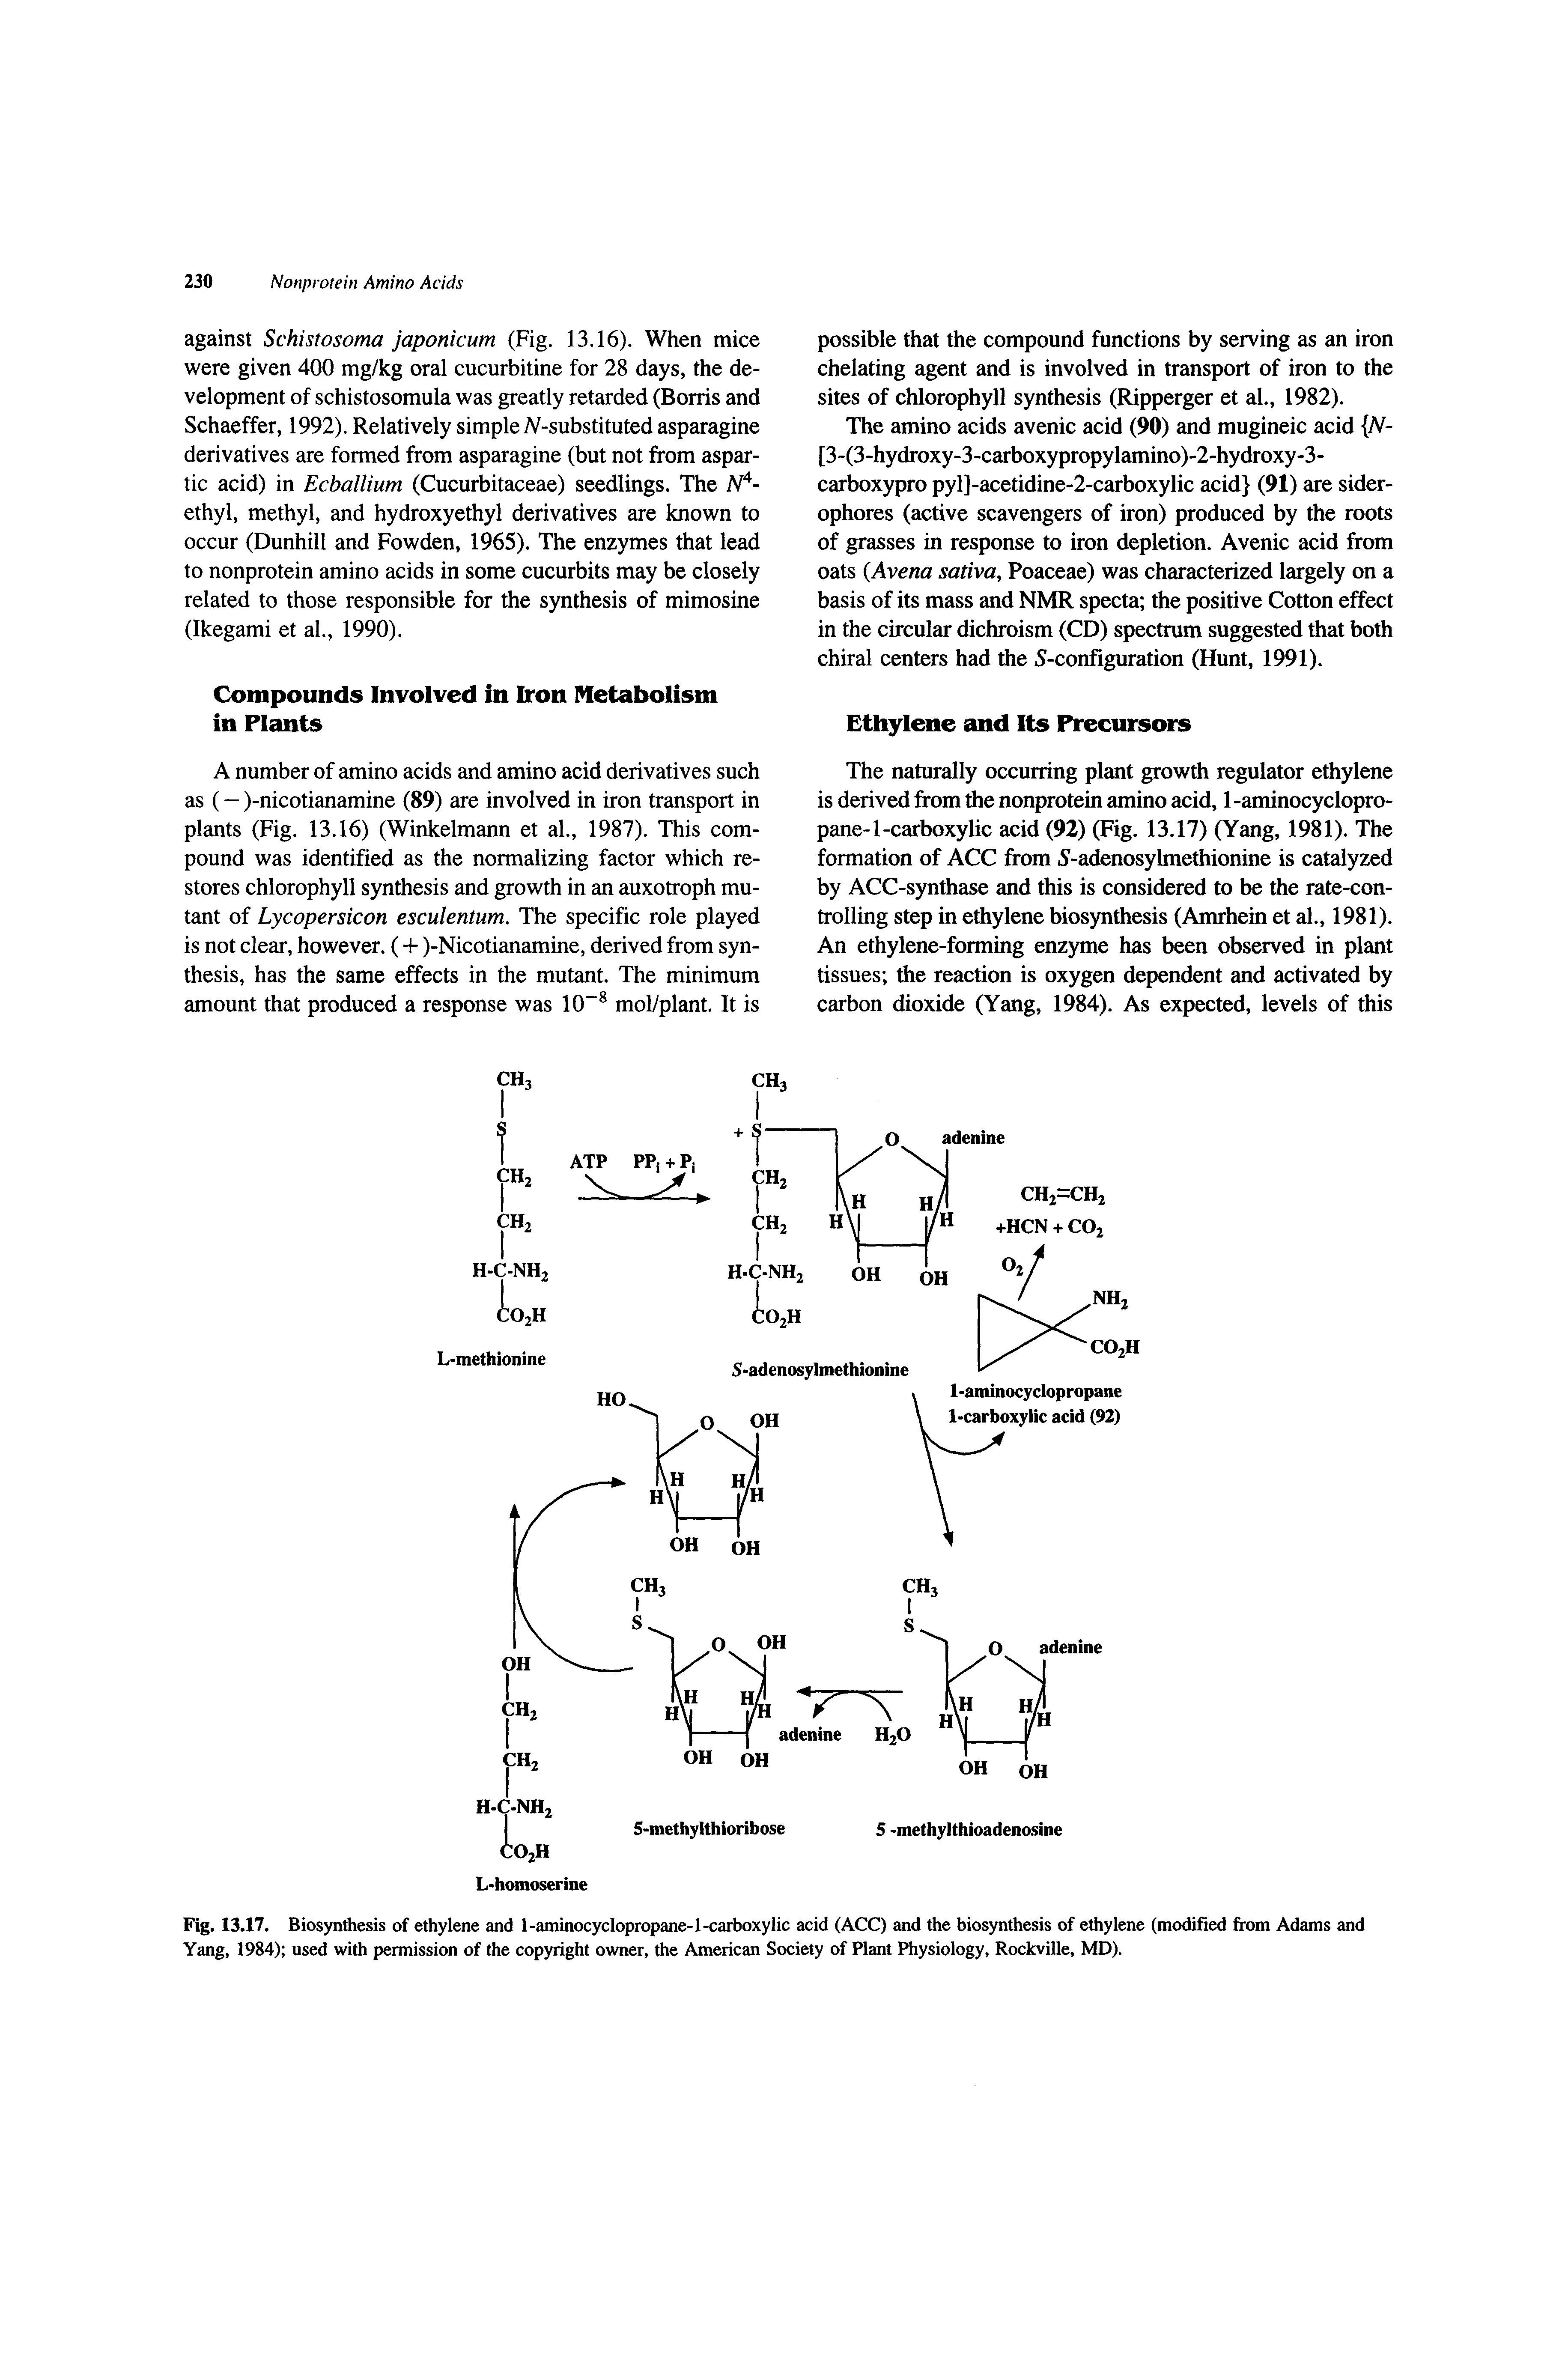 Fig. 13.17. Biosynthesis of ethylene and l-aminocyclopropane-l-carboxylic acid (ACC) and the biosynthesis of ethylene (modified from / Yang, 1984) used with permission of the copyright owner, the American Society of Plant Physiology, Rockville, MD).